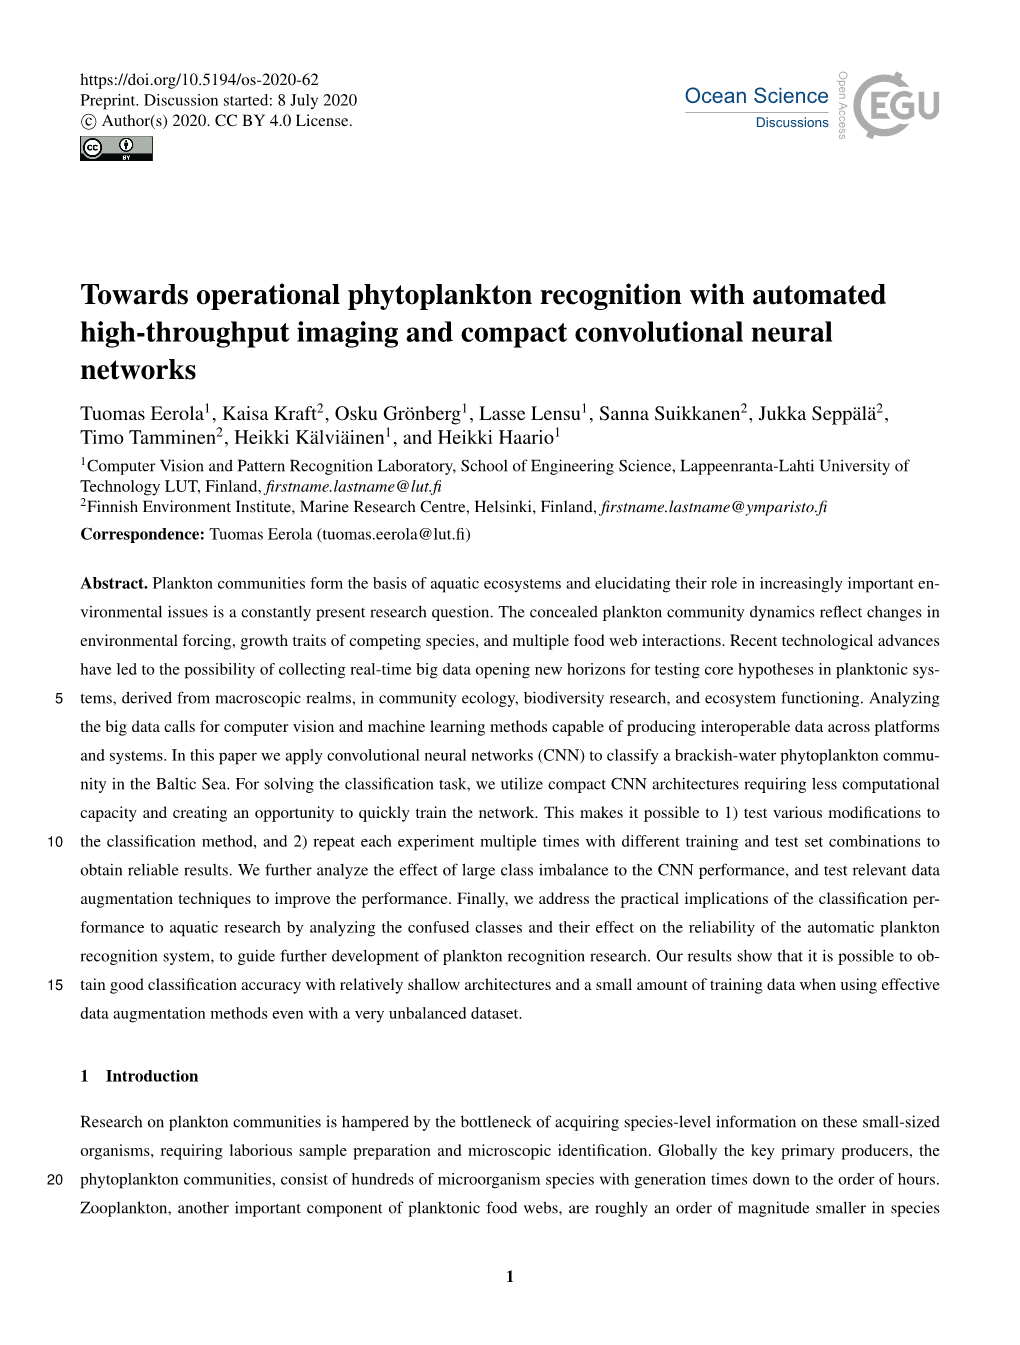 Towards Operational Phytoplankton Recognition with Automated High